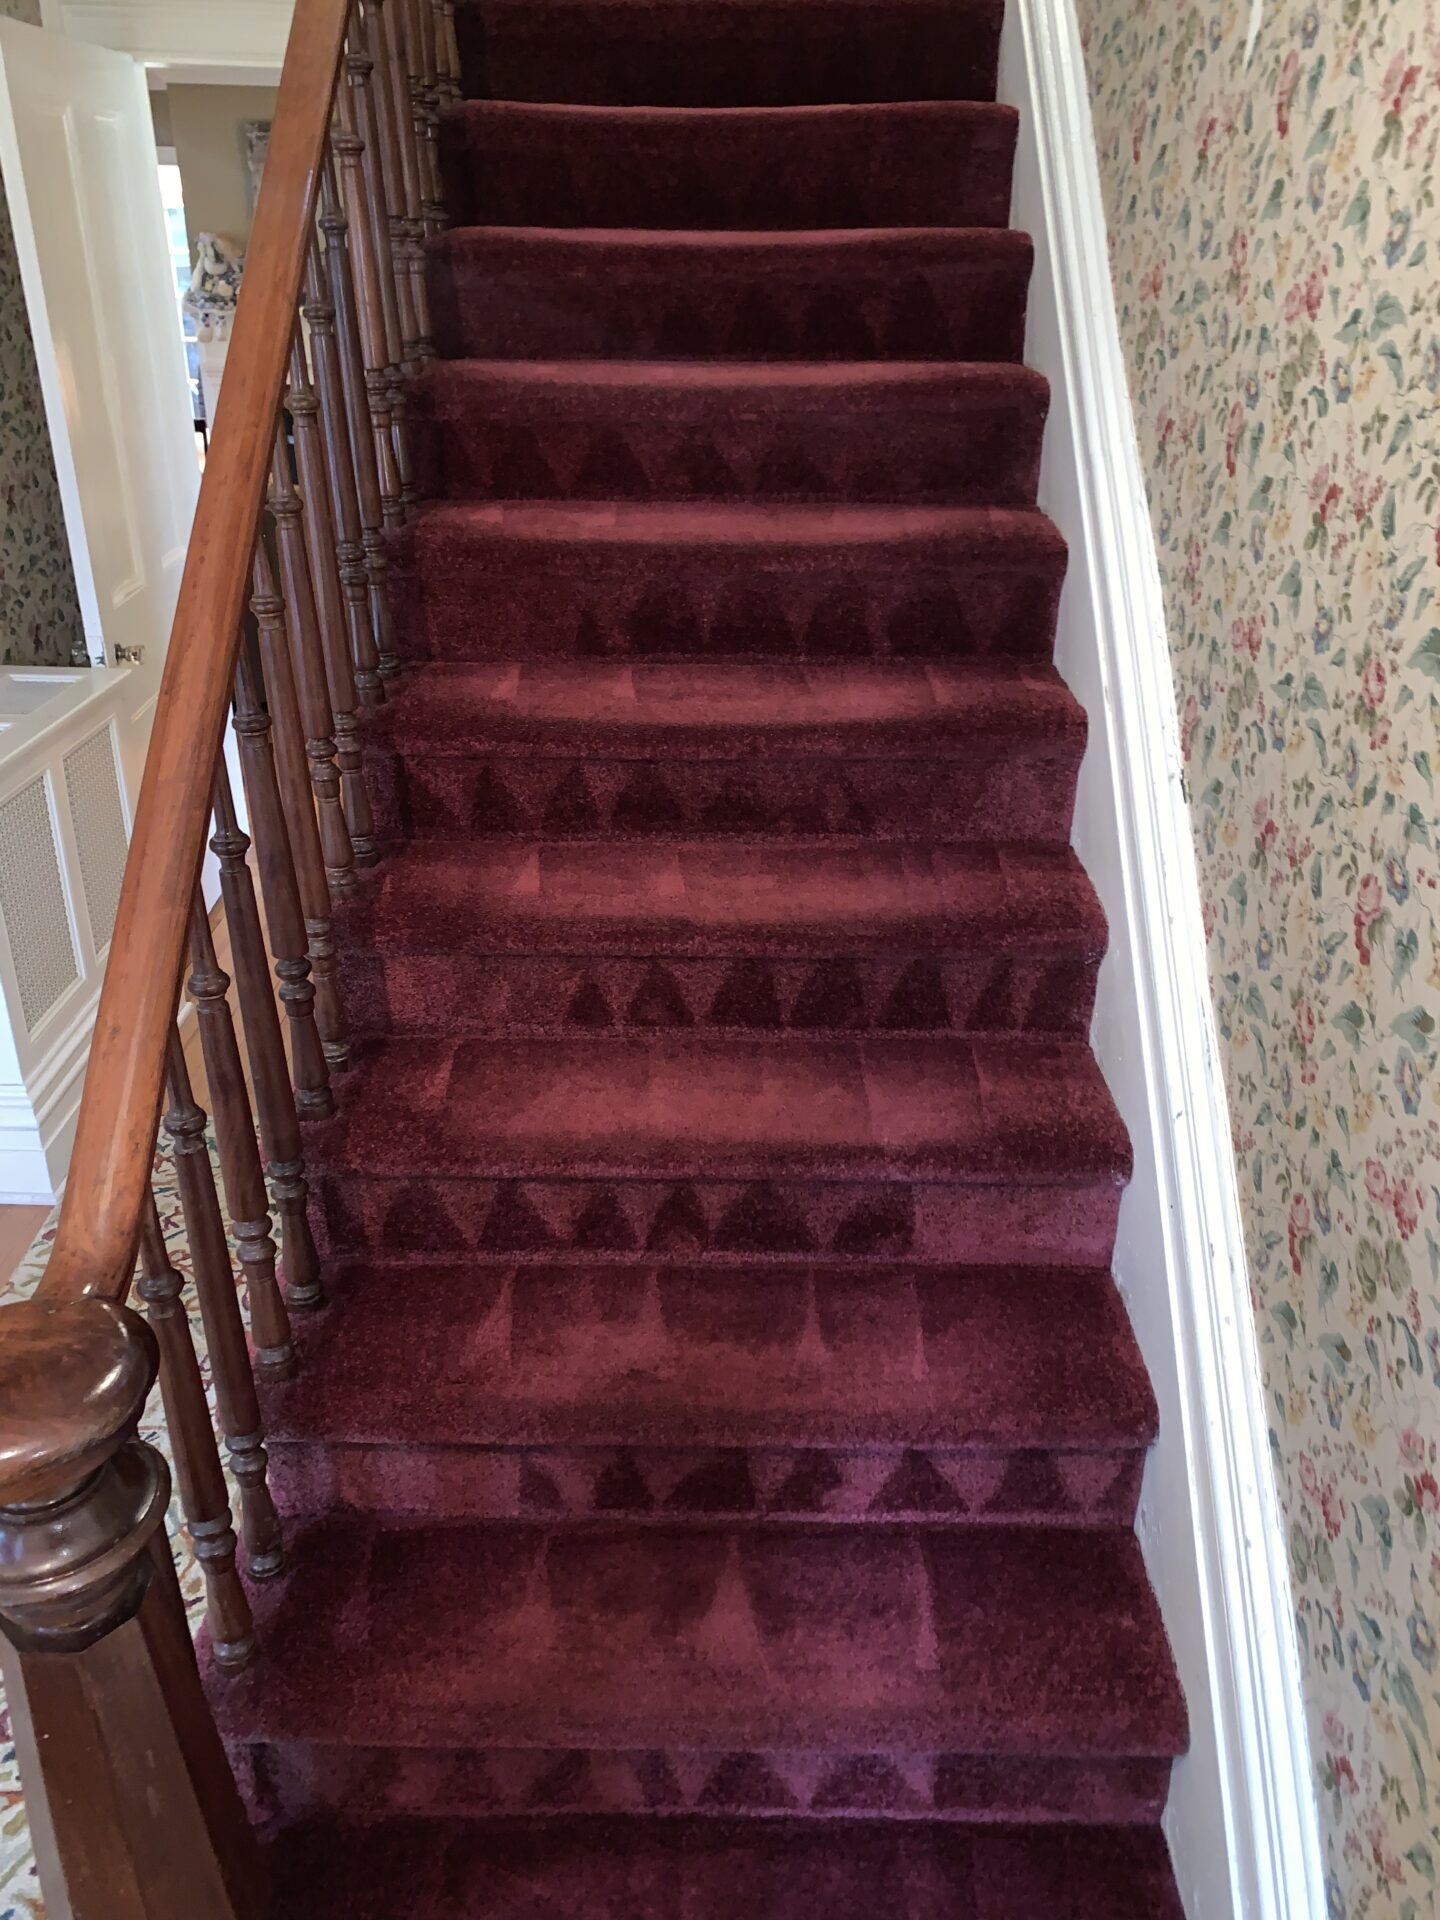 A well cleaned stair inside of the house in red color